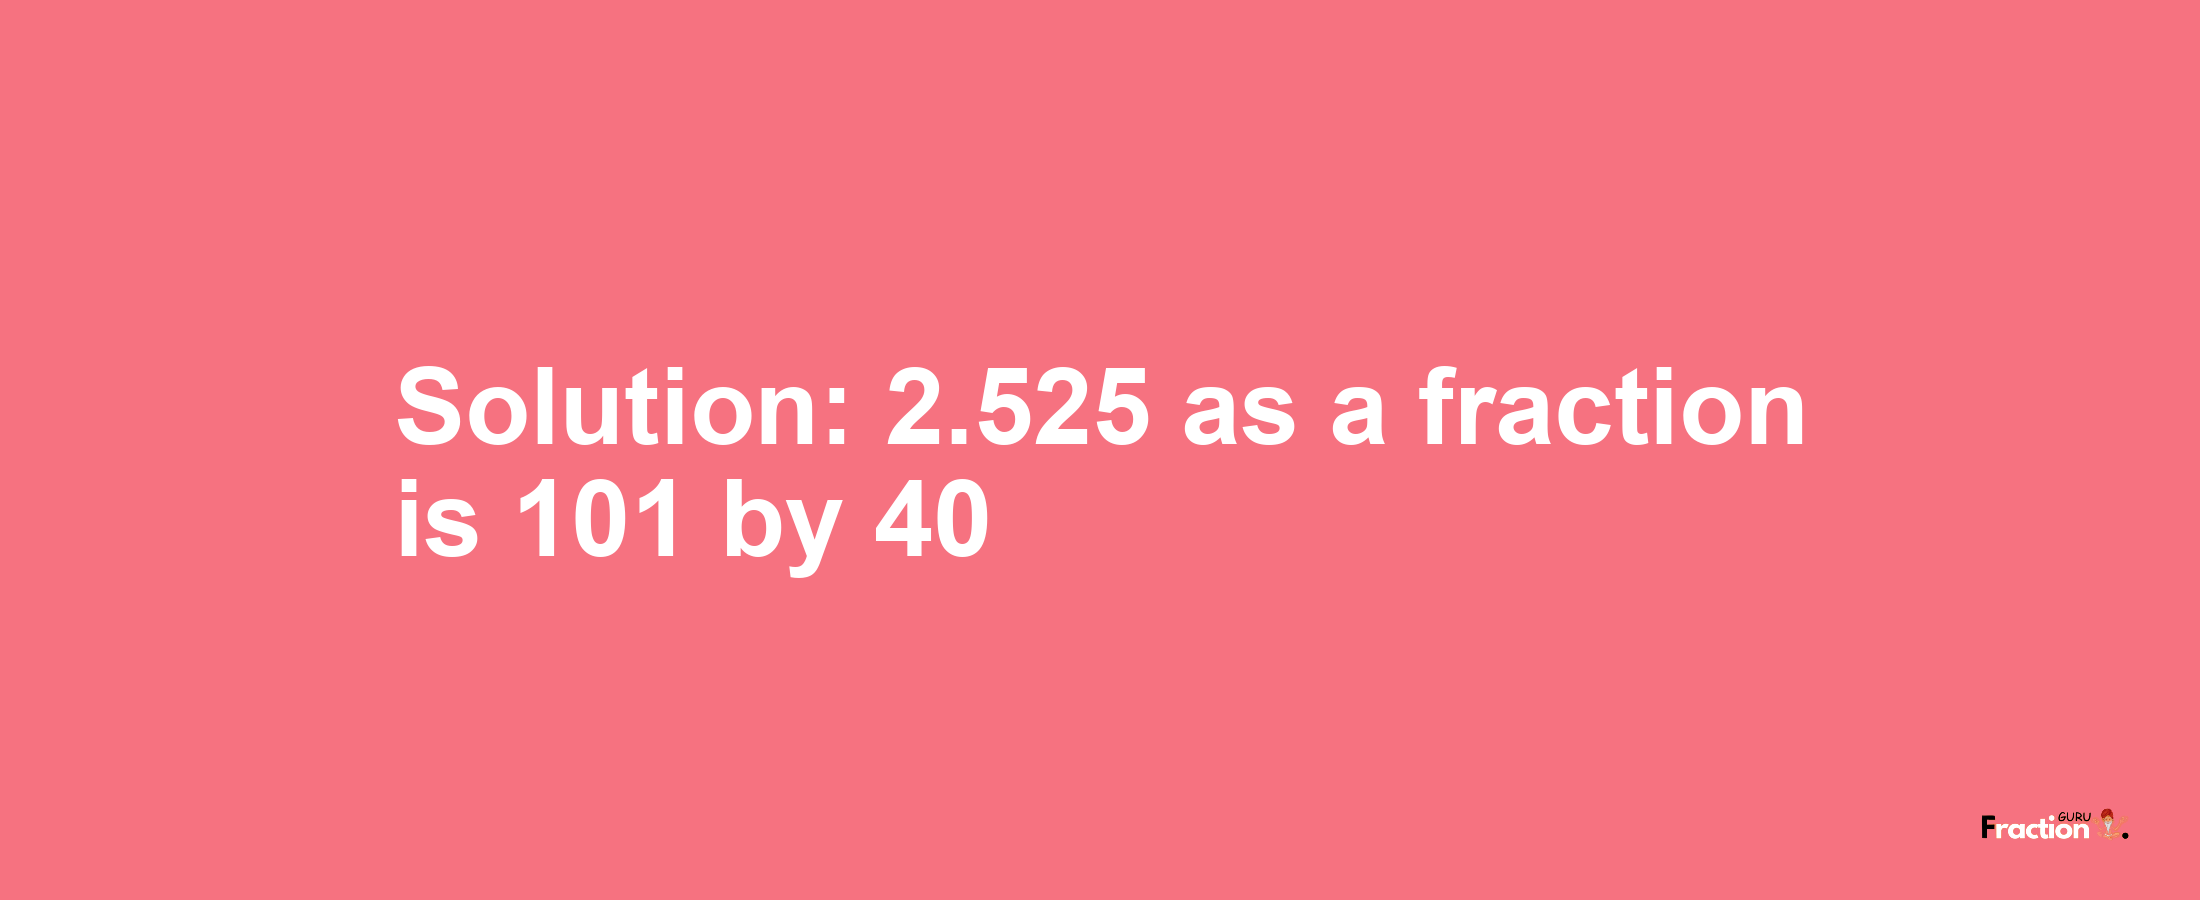 Solution:2.525 as a fraction is 101/40